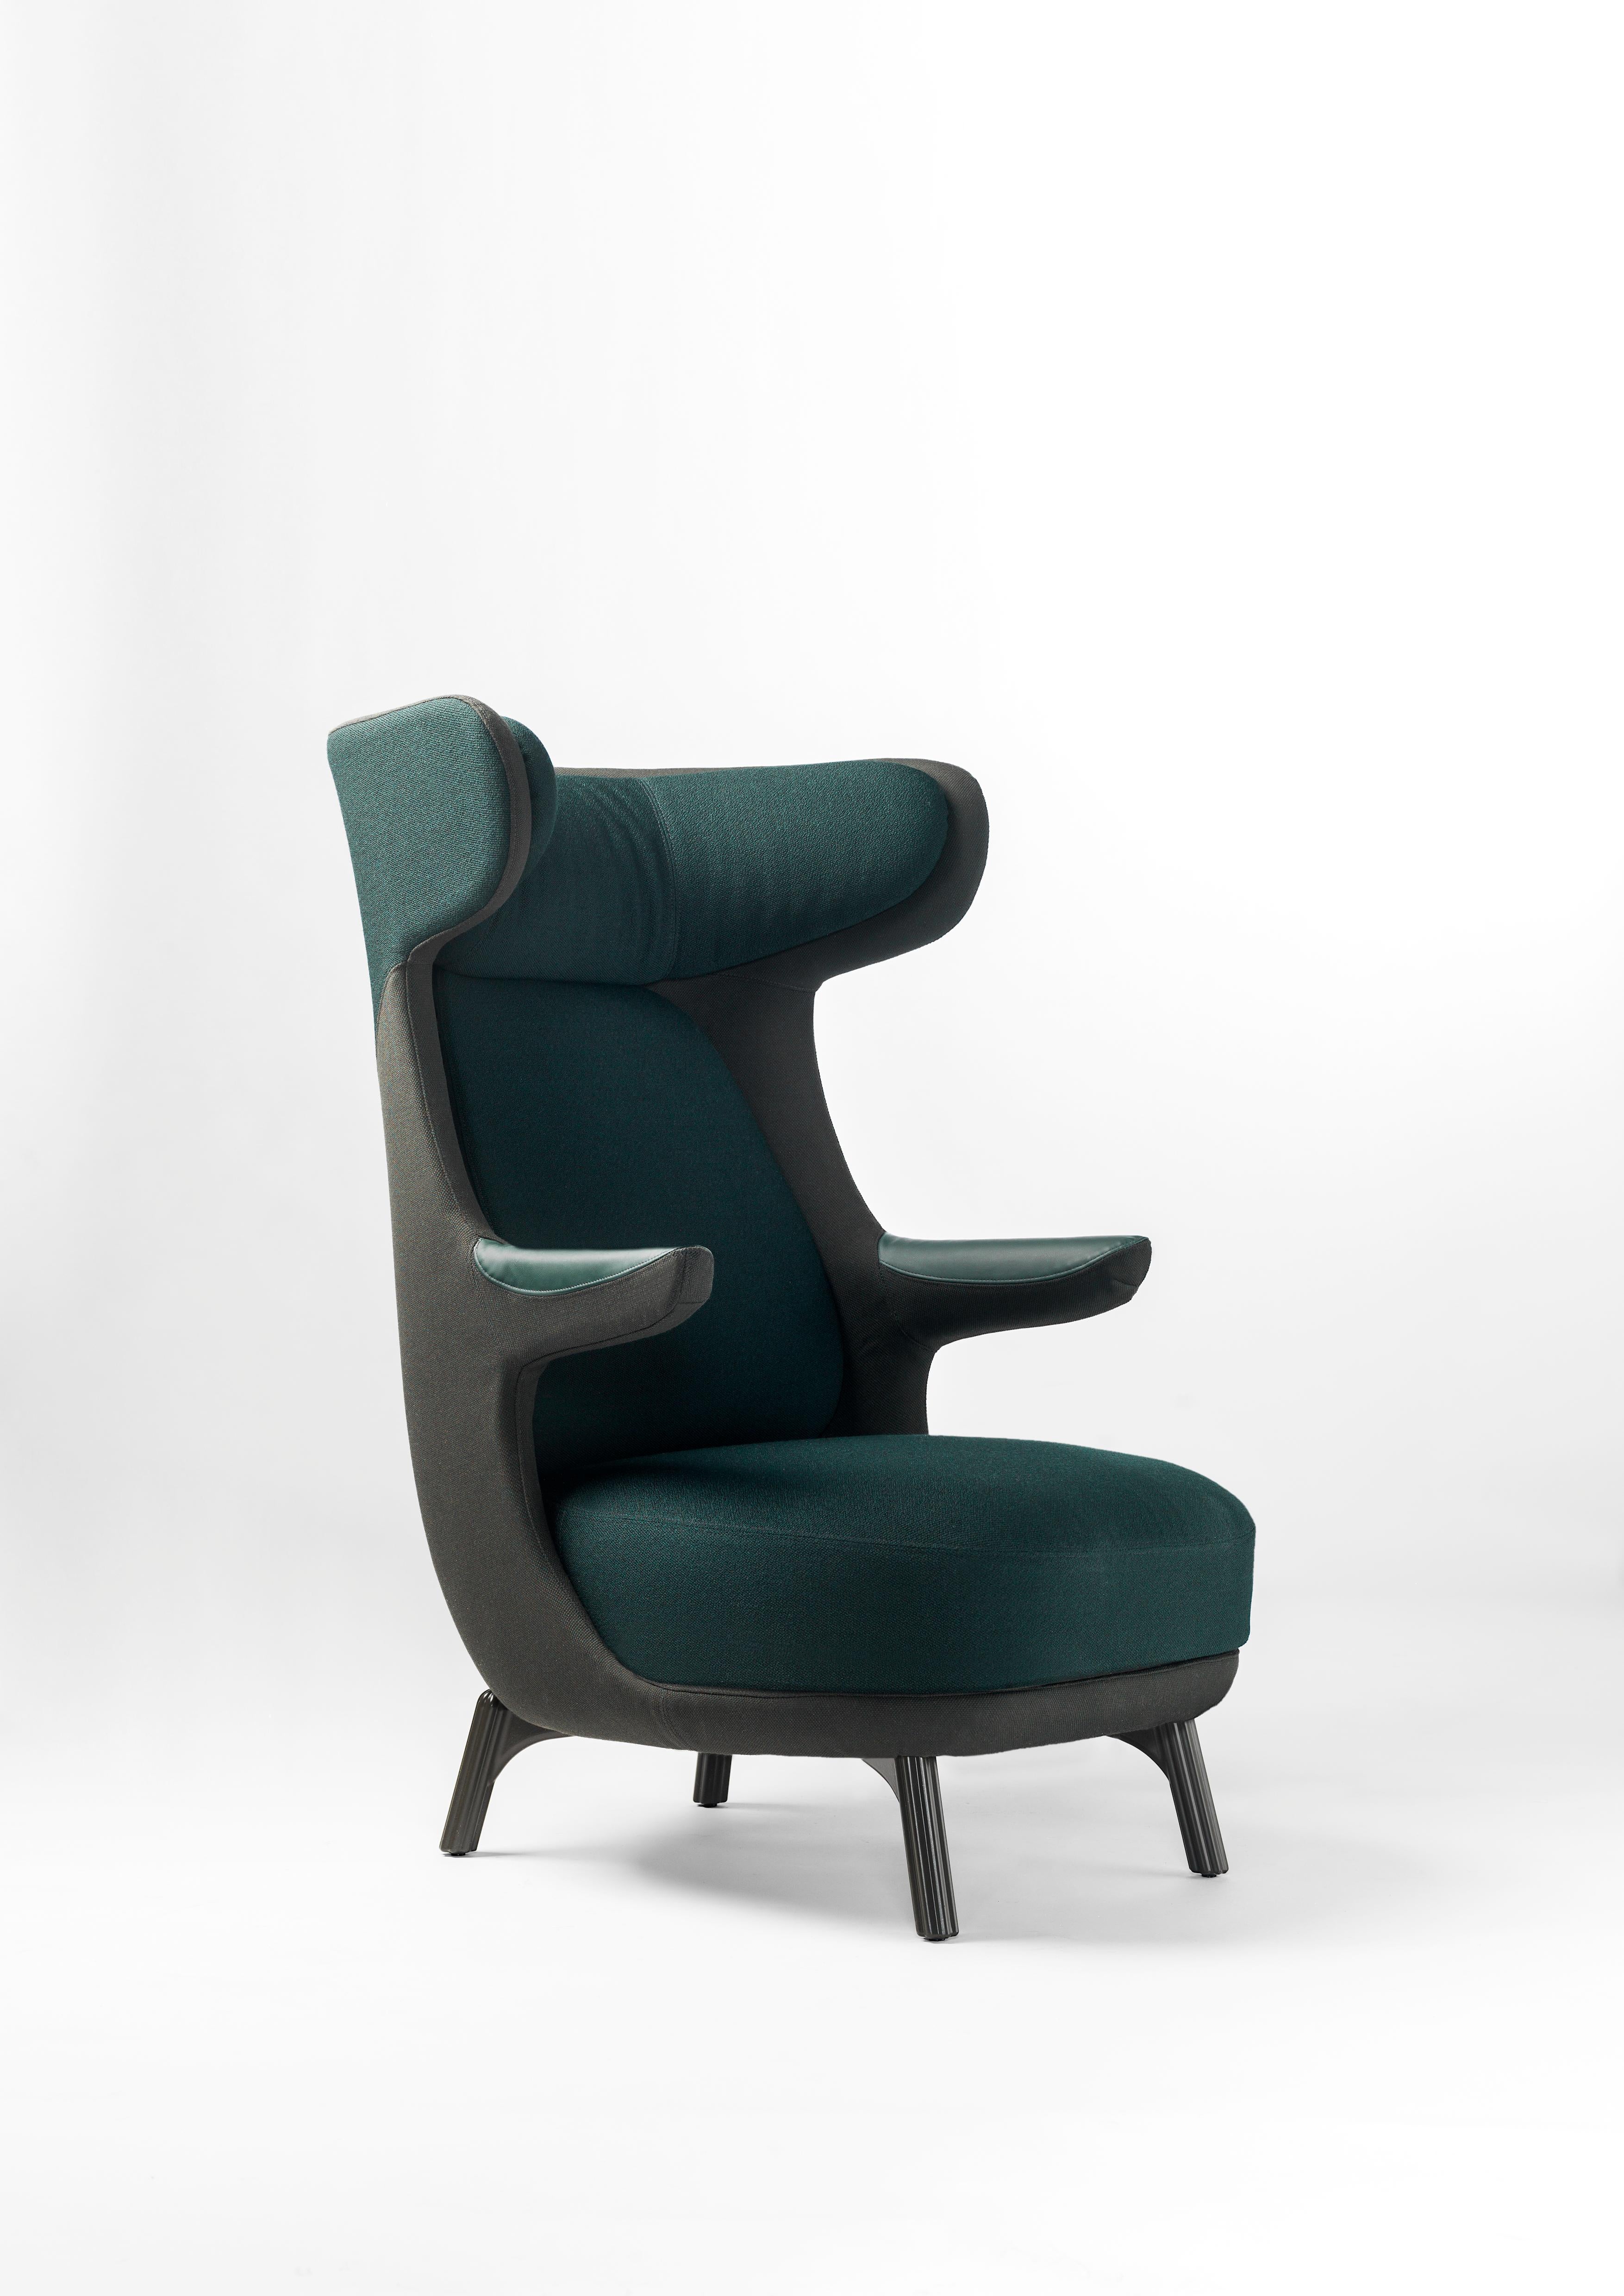 Hayon Edition Dino armchair in fabric or leather upholstery by BD Barcelona. Dino is the new armchair designed by Jaime Hayon for BD Barcelona.

Cushion covers are removable. Cast aluminum legs painted in a powder coating. 

Available is a